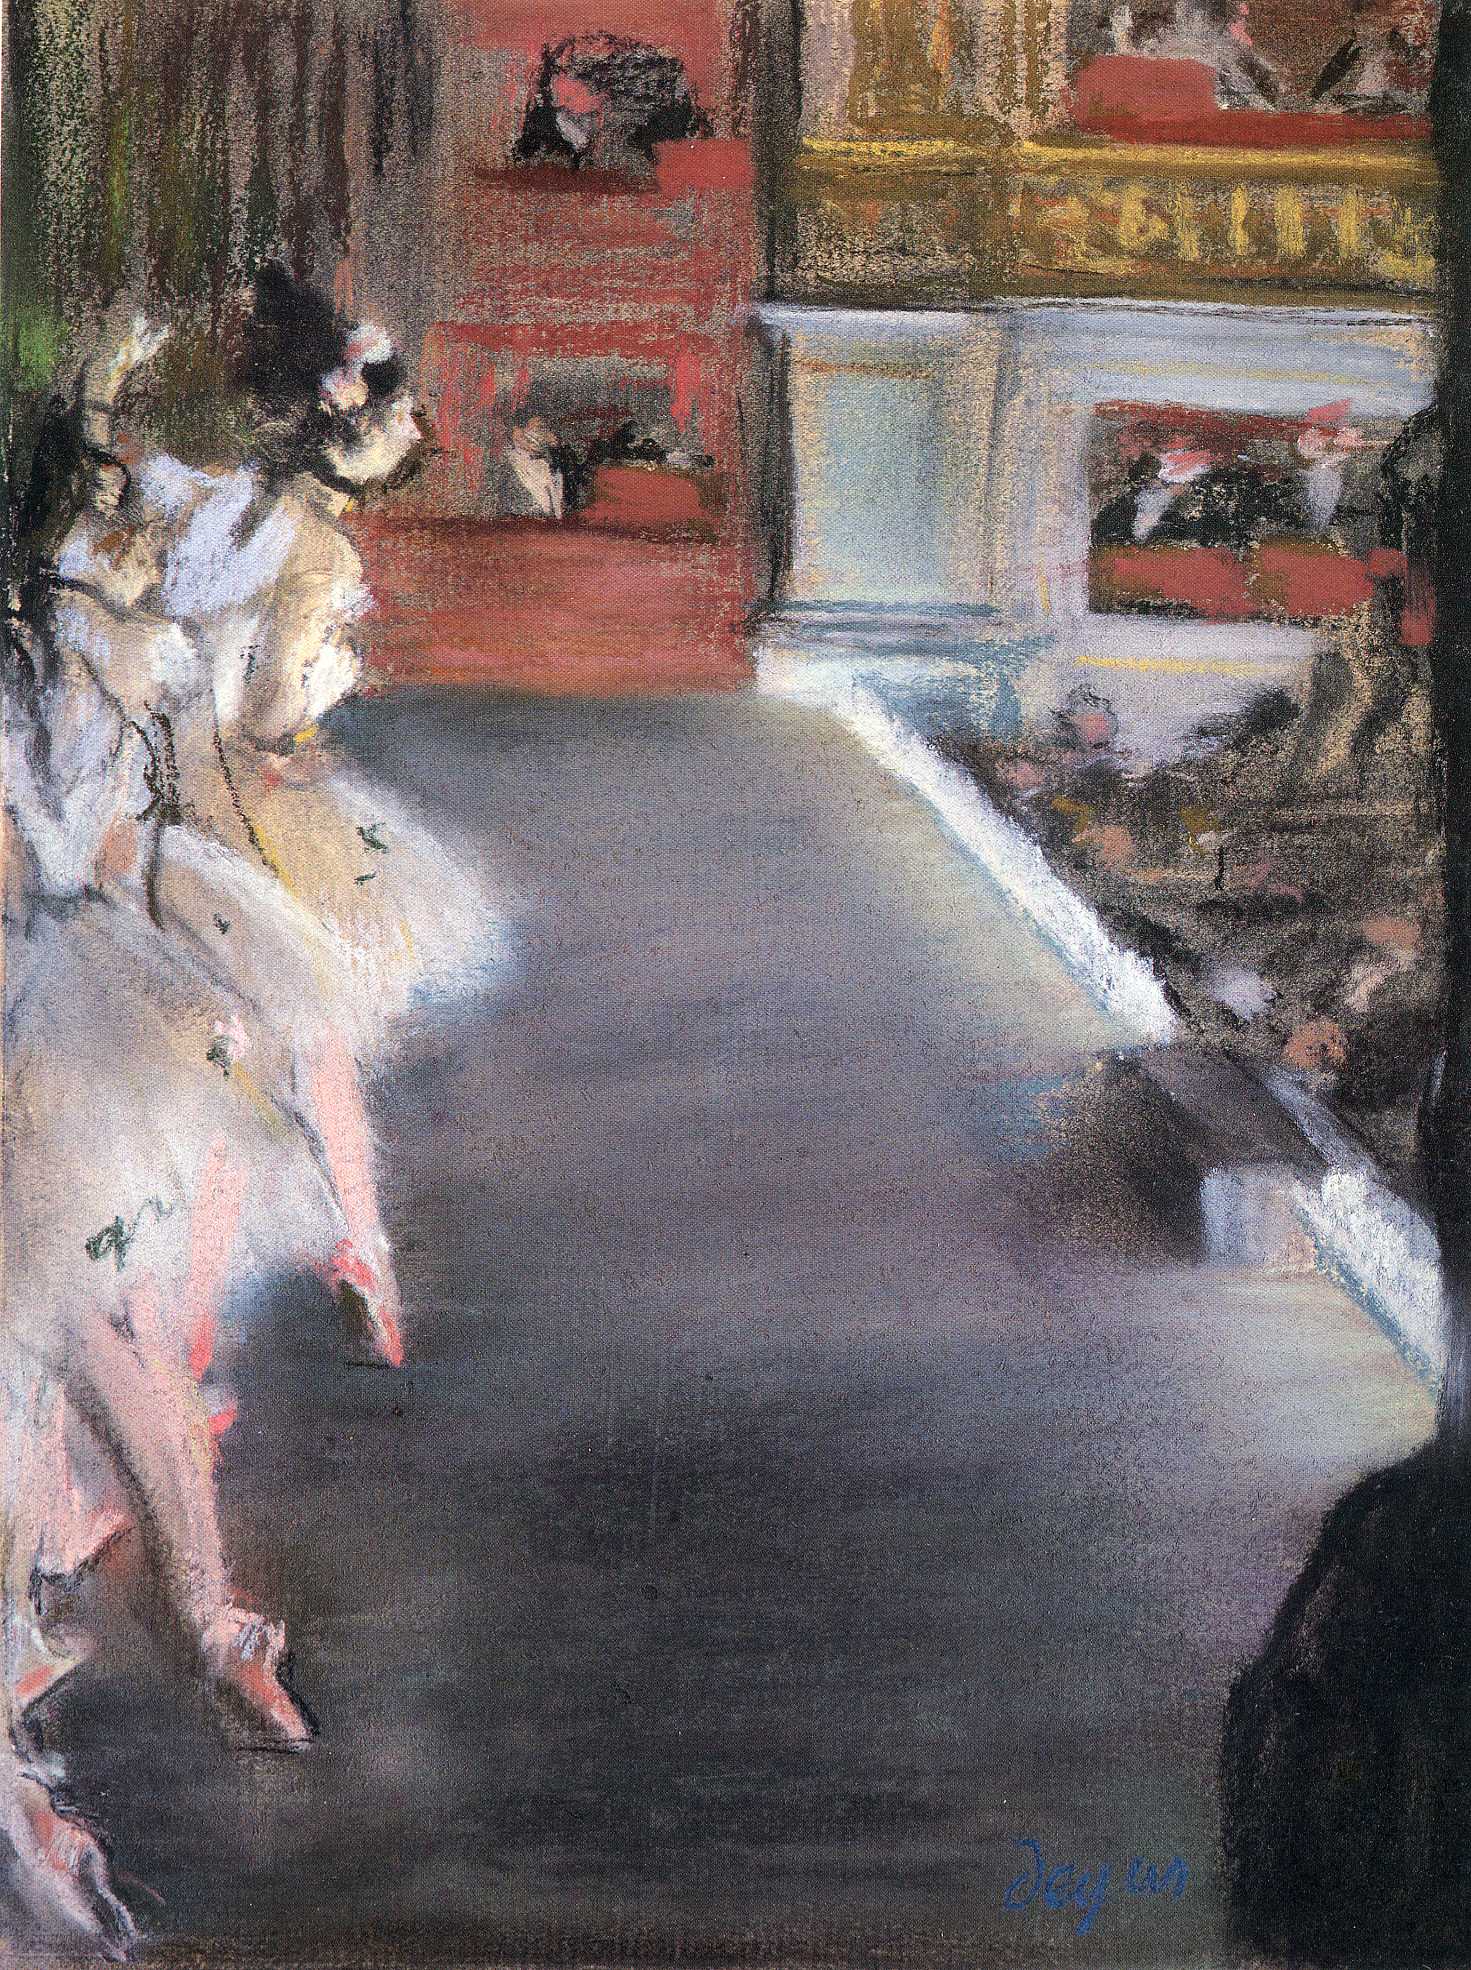 Dancers at the Old Opera House 1877